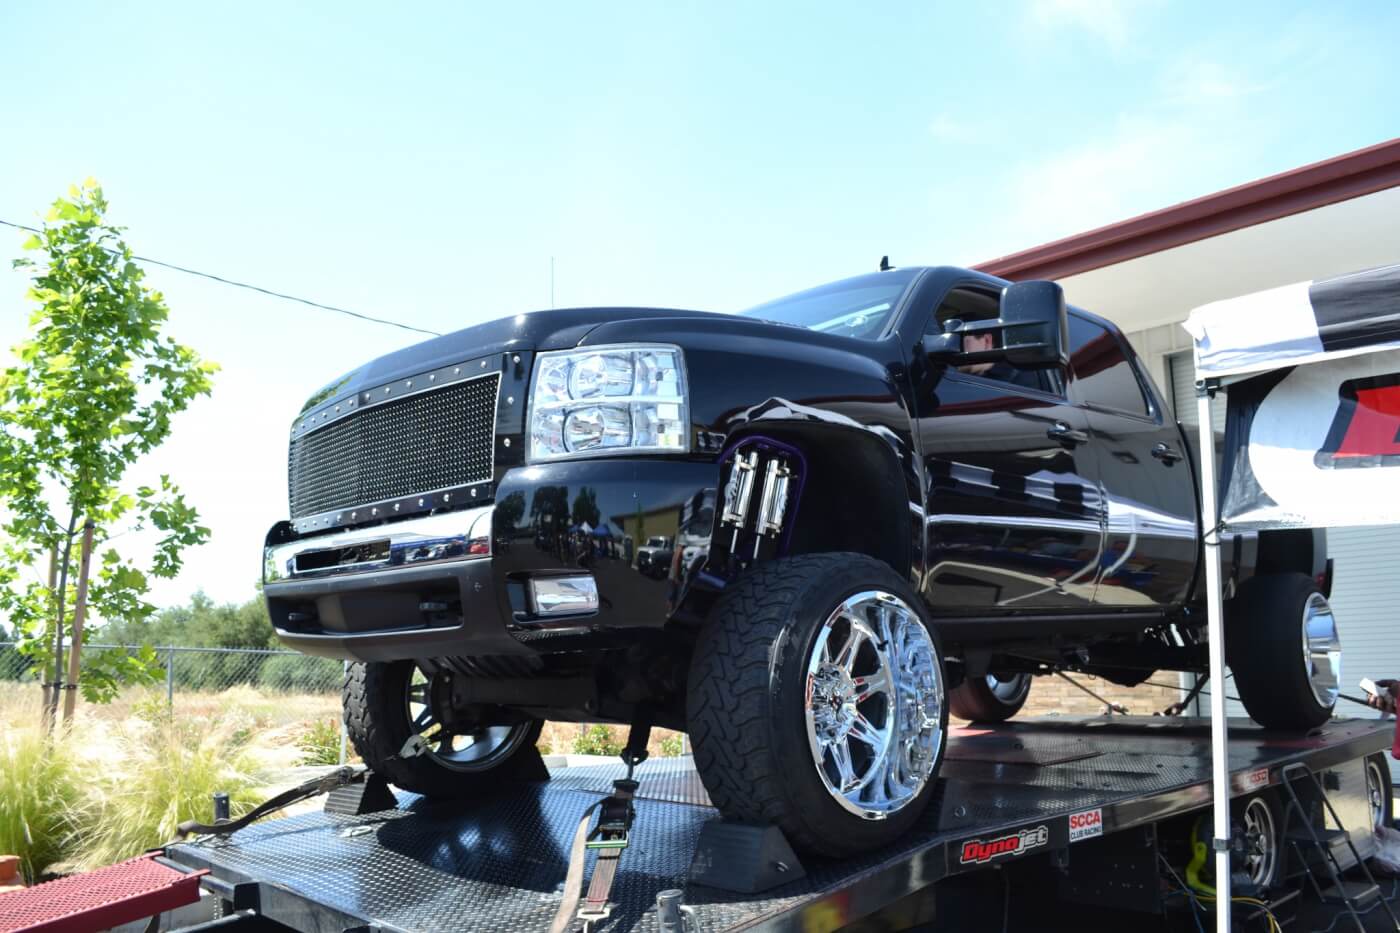 This Duramax put down a solid 502 rwhp, showing how strong lightly modded GMs can be.